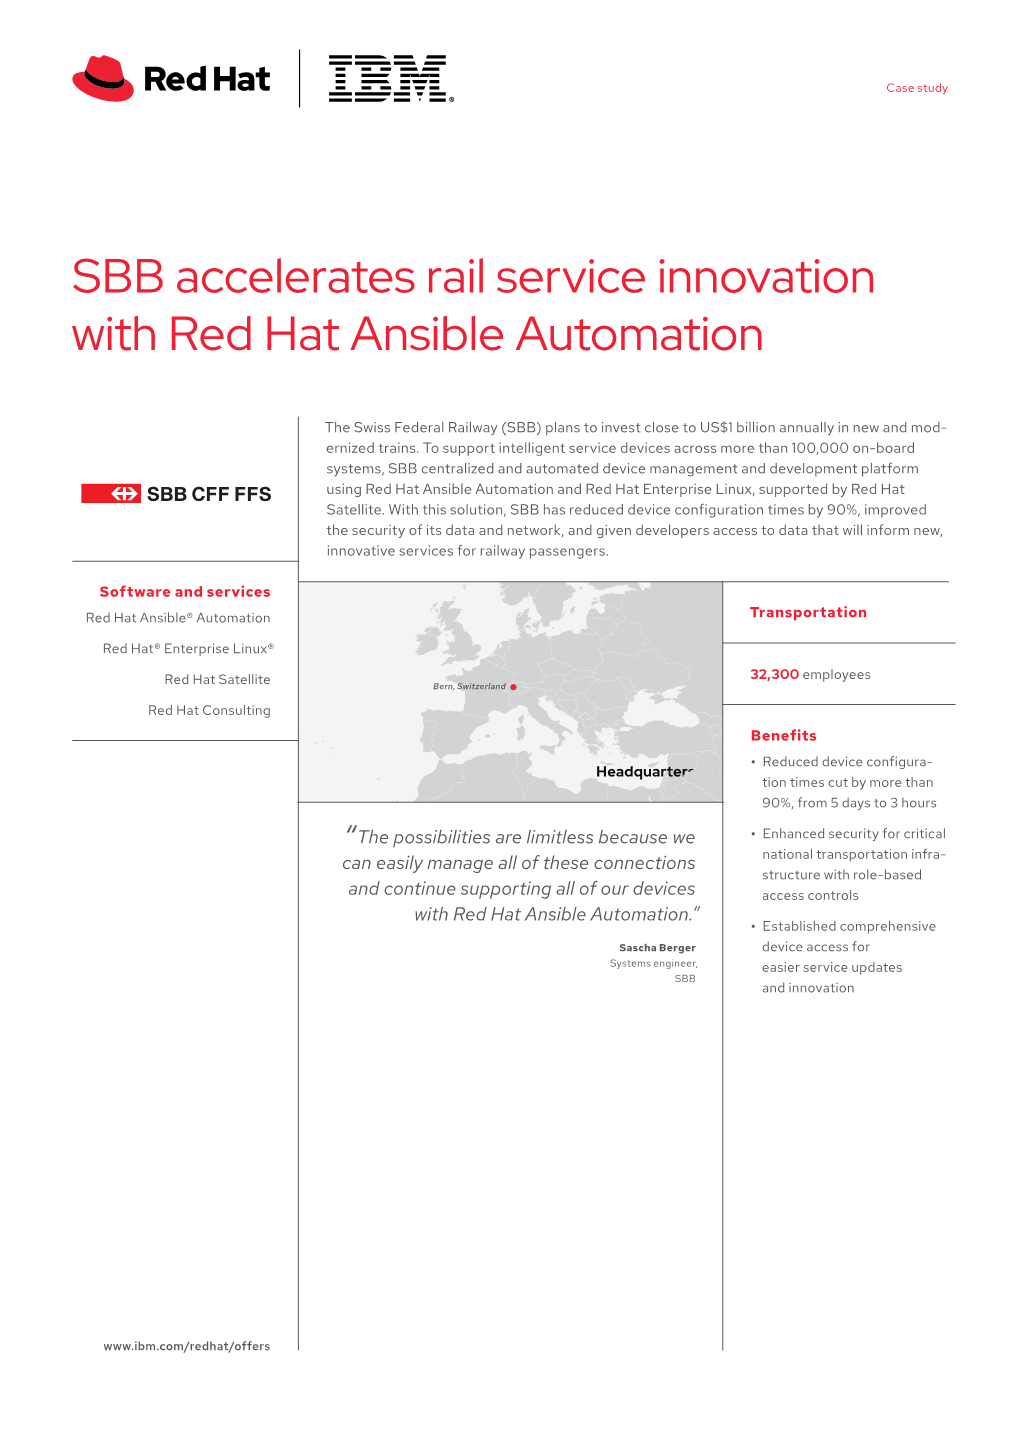 SBB Accelerates Rail Service Innovation with Red Hat Ansible Automation